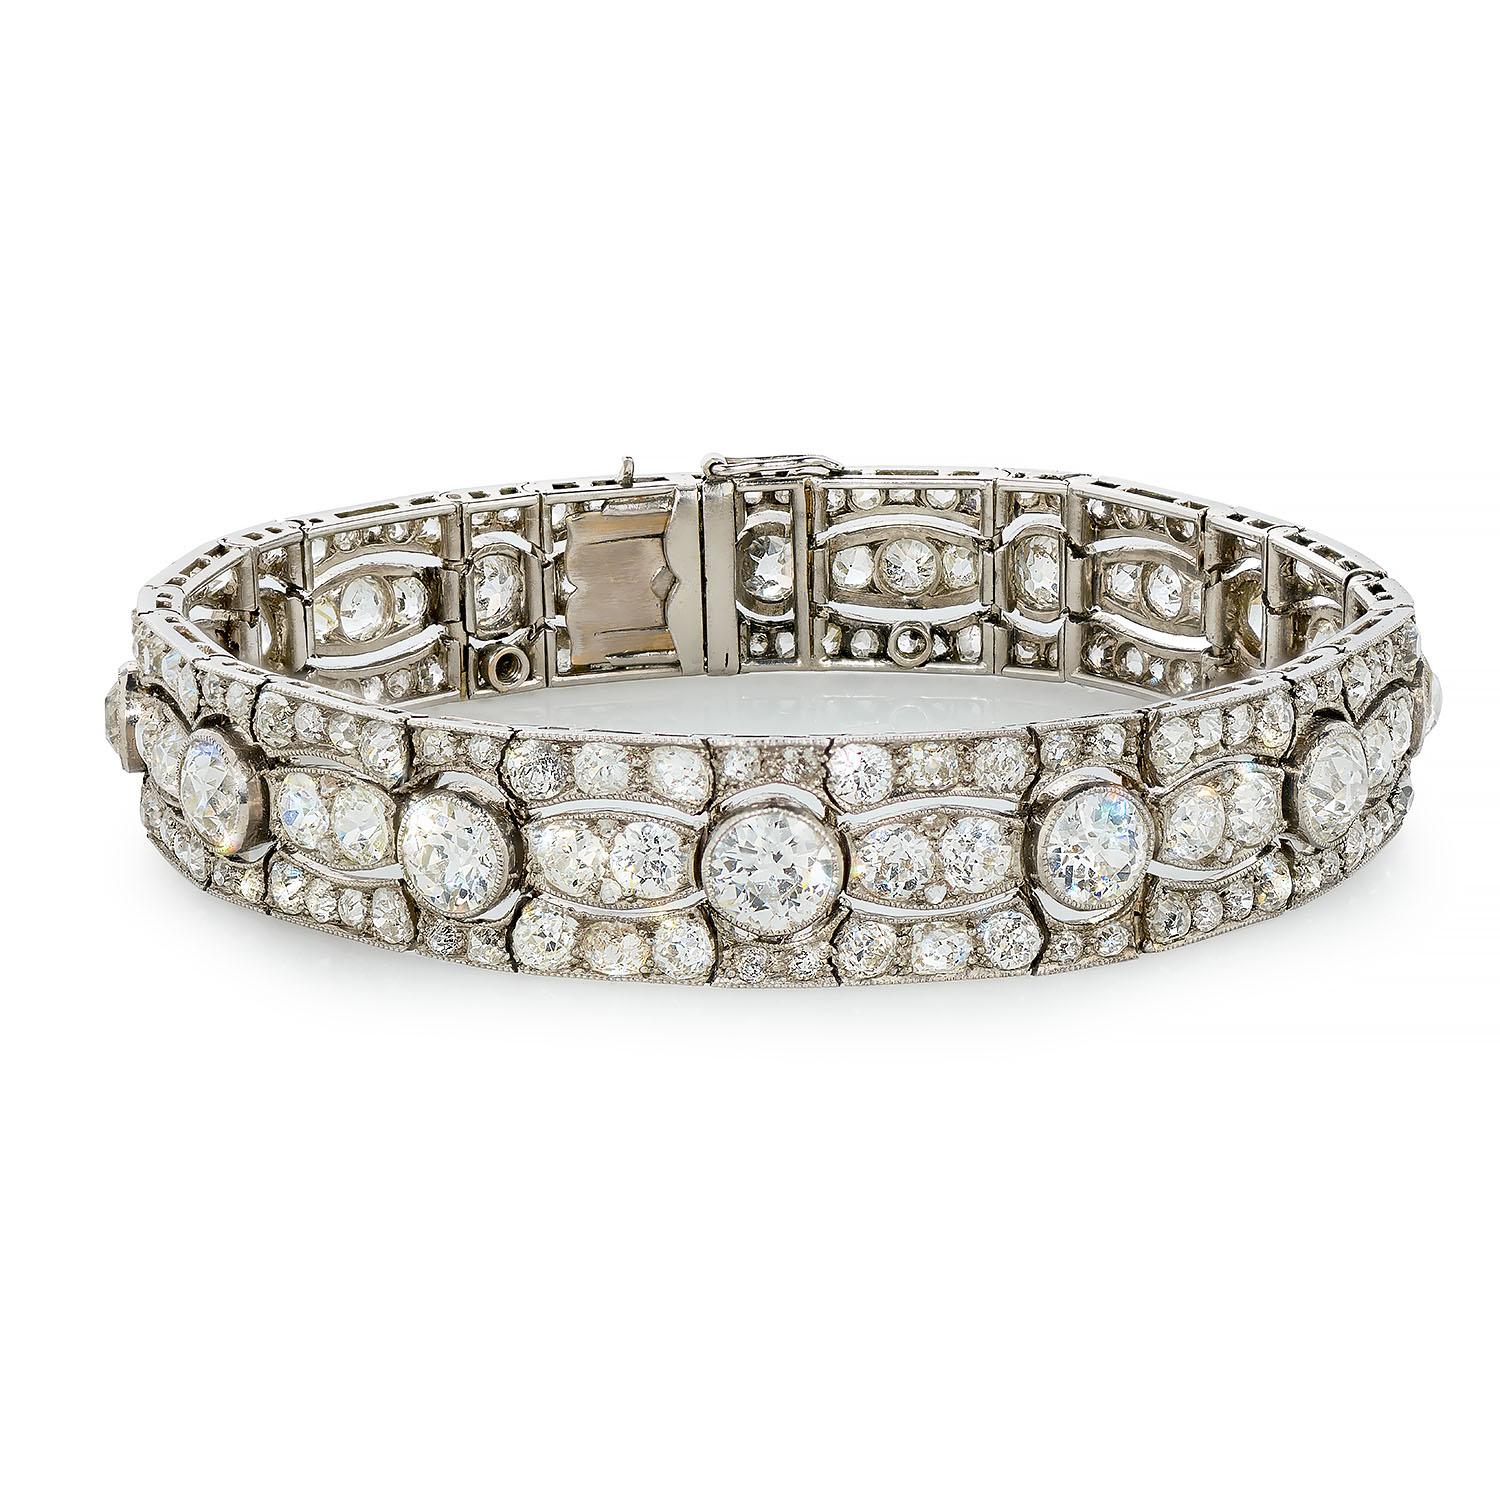 Extraordinary Art Deco Bracelet, ca. 1915, designed originally as bandeau. (headband)
It is made of platinum and white gold, ca. 18 carats diamonds I-K, VS-SI, truly an outstanding quality.
Length: 18,5 cm / 7,28 inches
A sparkling highlight for a